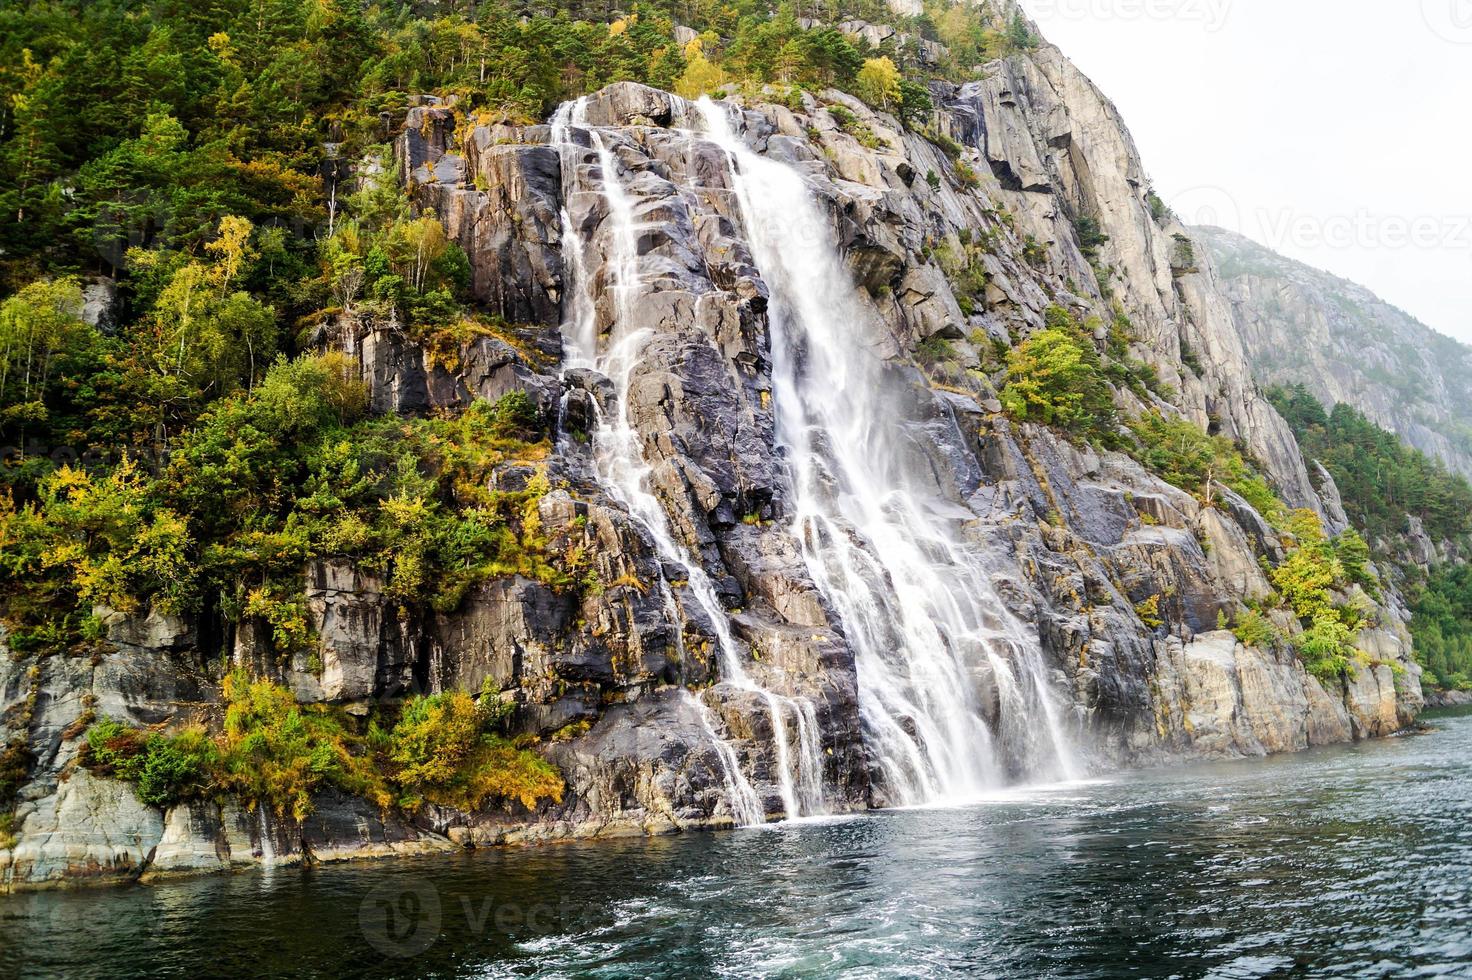 Rock formation in the Lysefjord with the famous Hengjanefossen waterfall photo